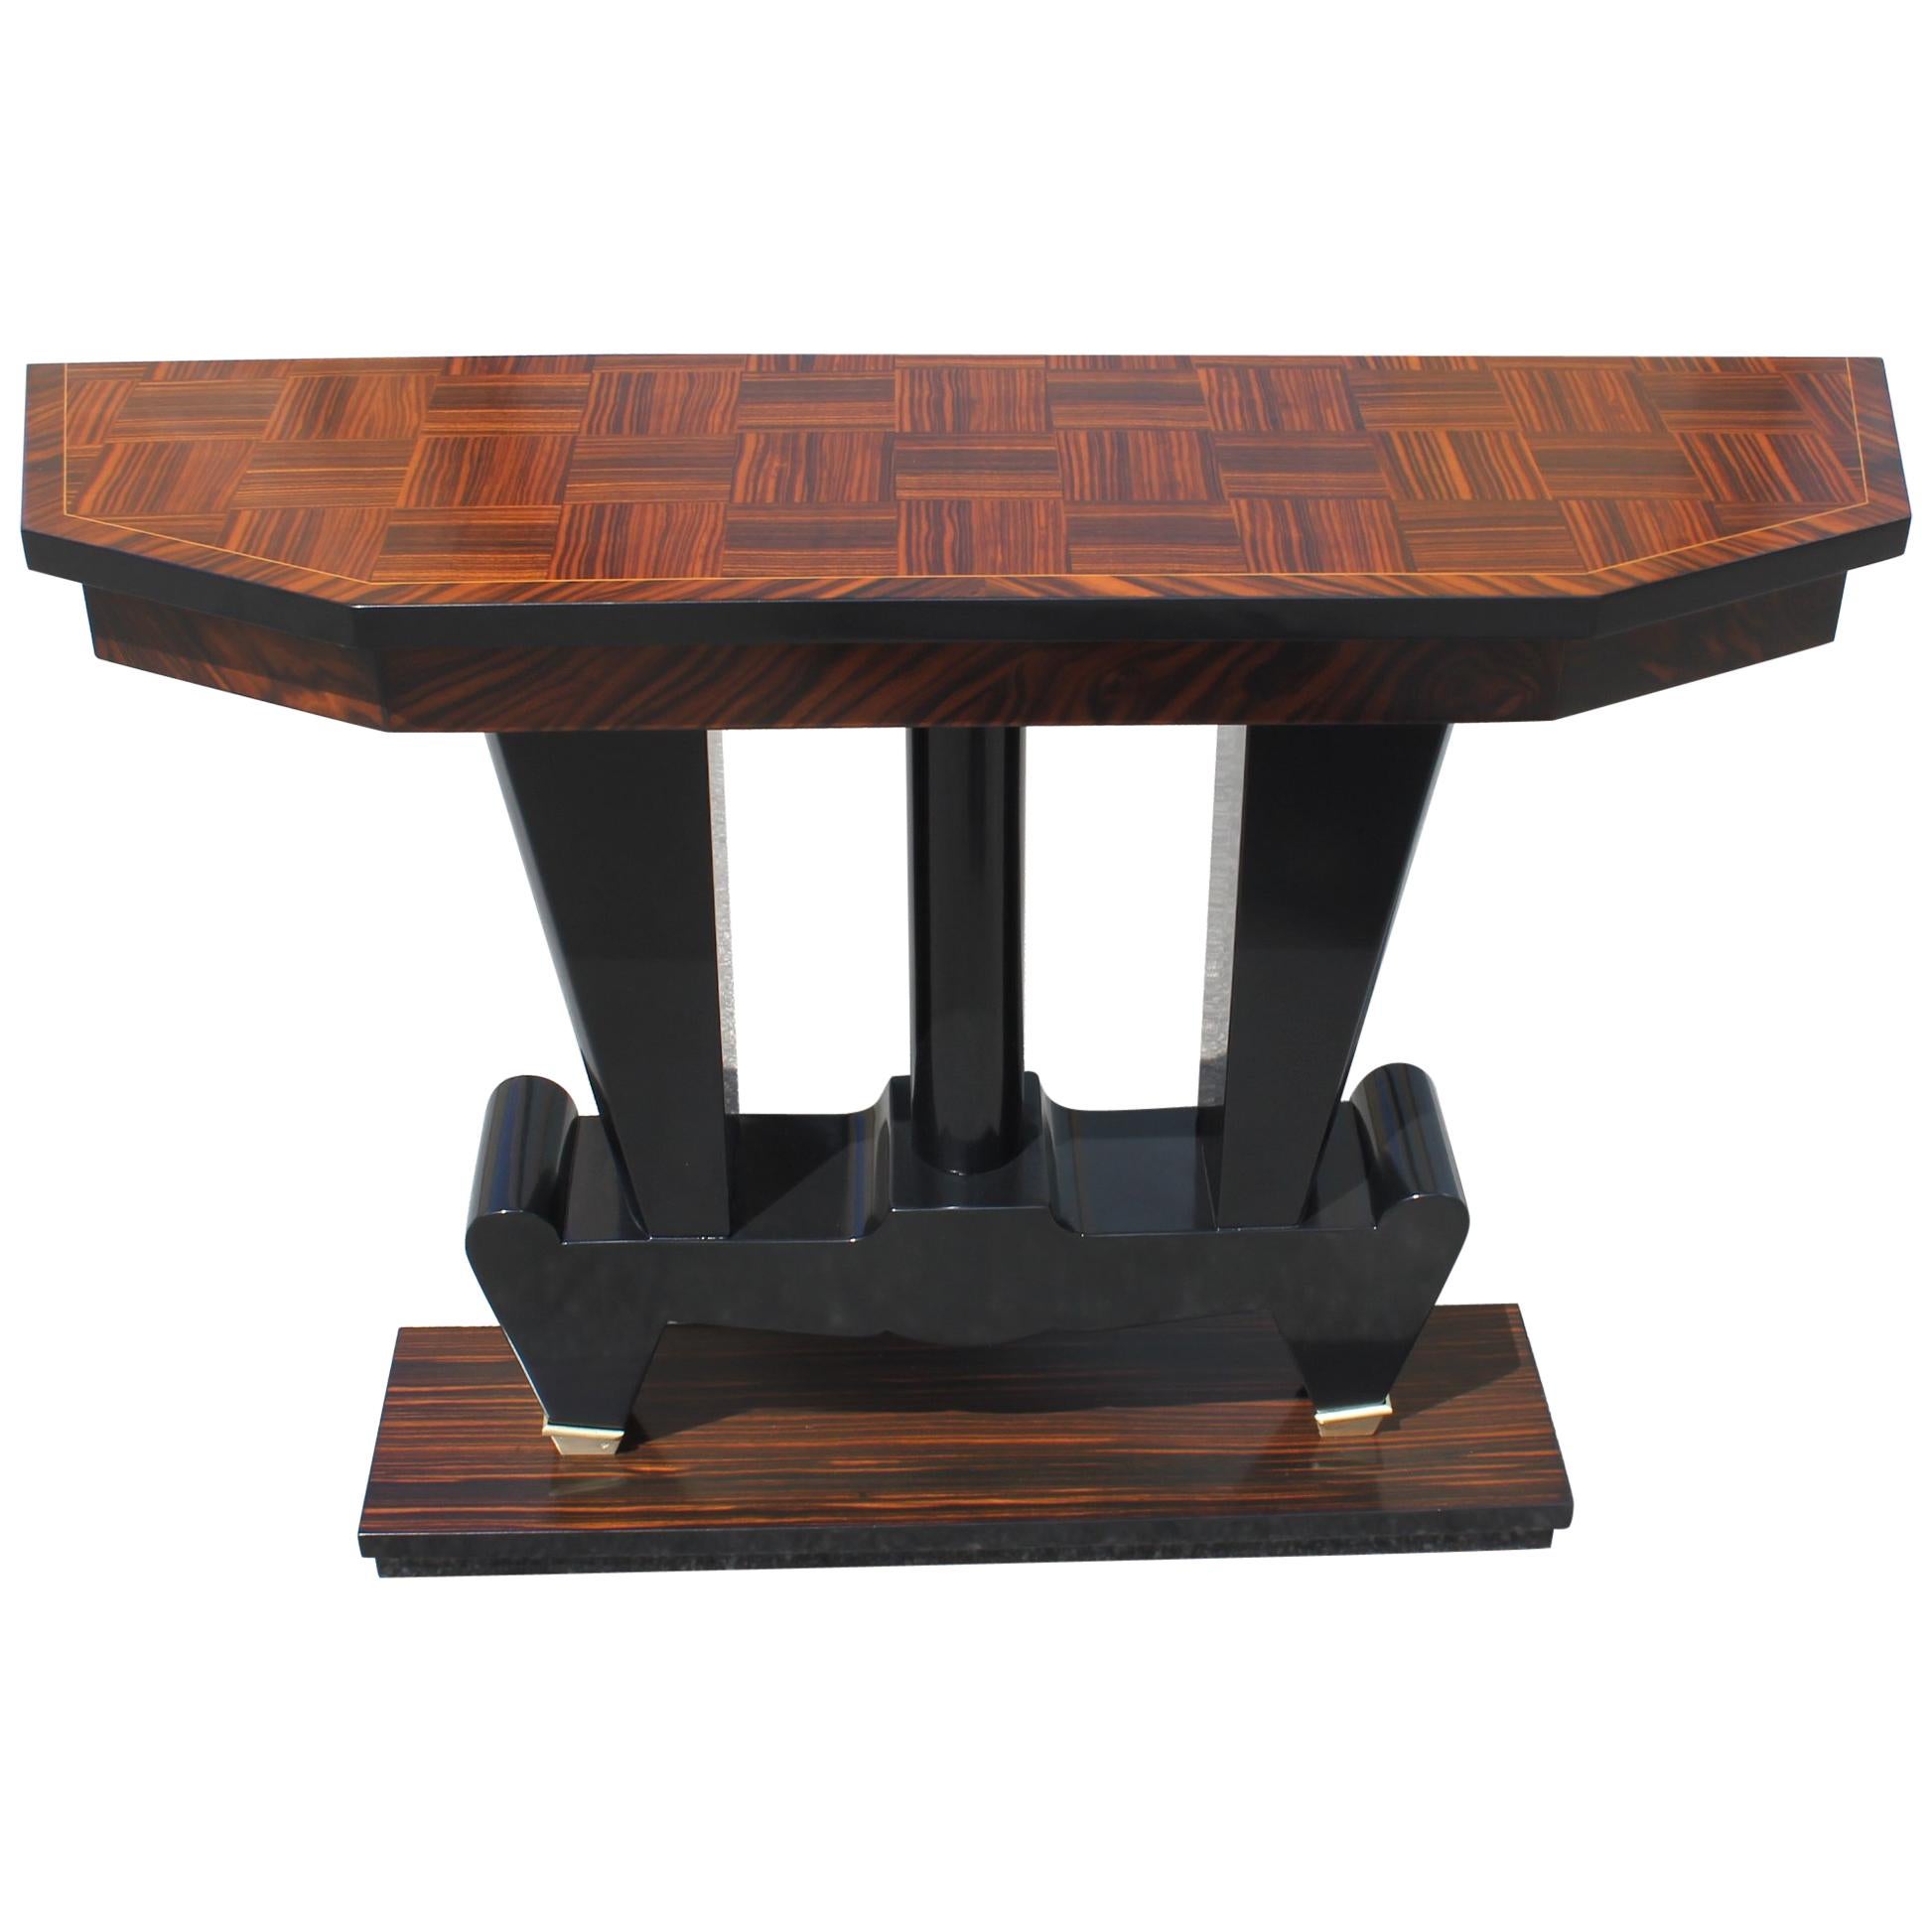 Classic French Art Deco Exotic Macassar Ebony Console Tables, circa 1940s For Sale